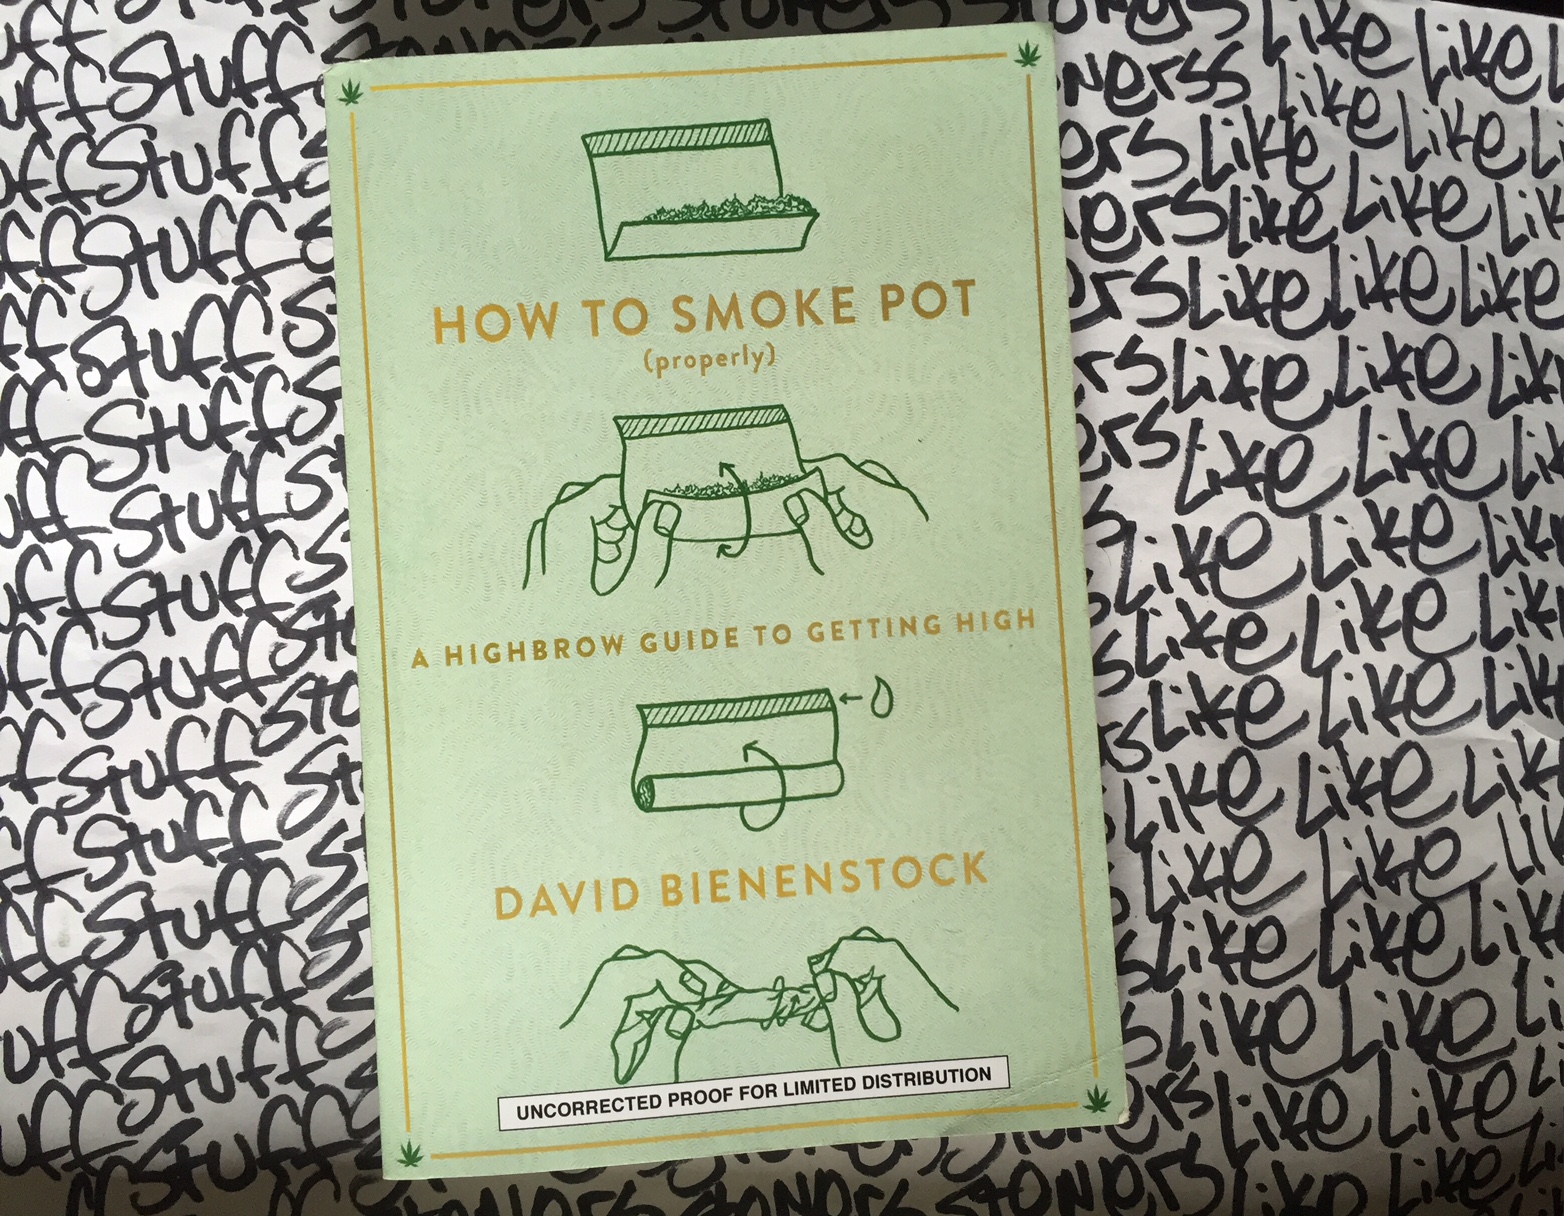 How To Smoke Pot Properly Book